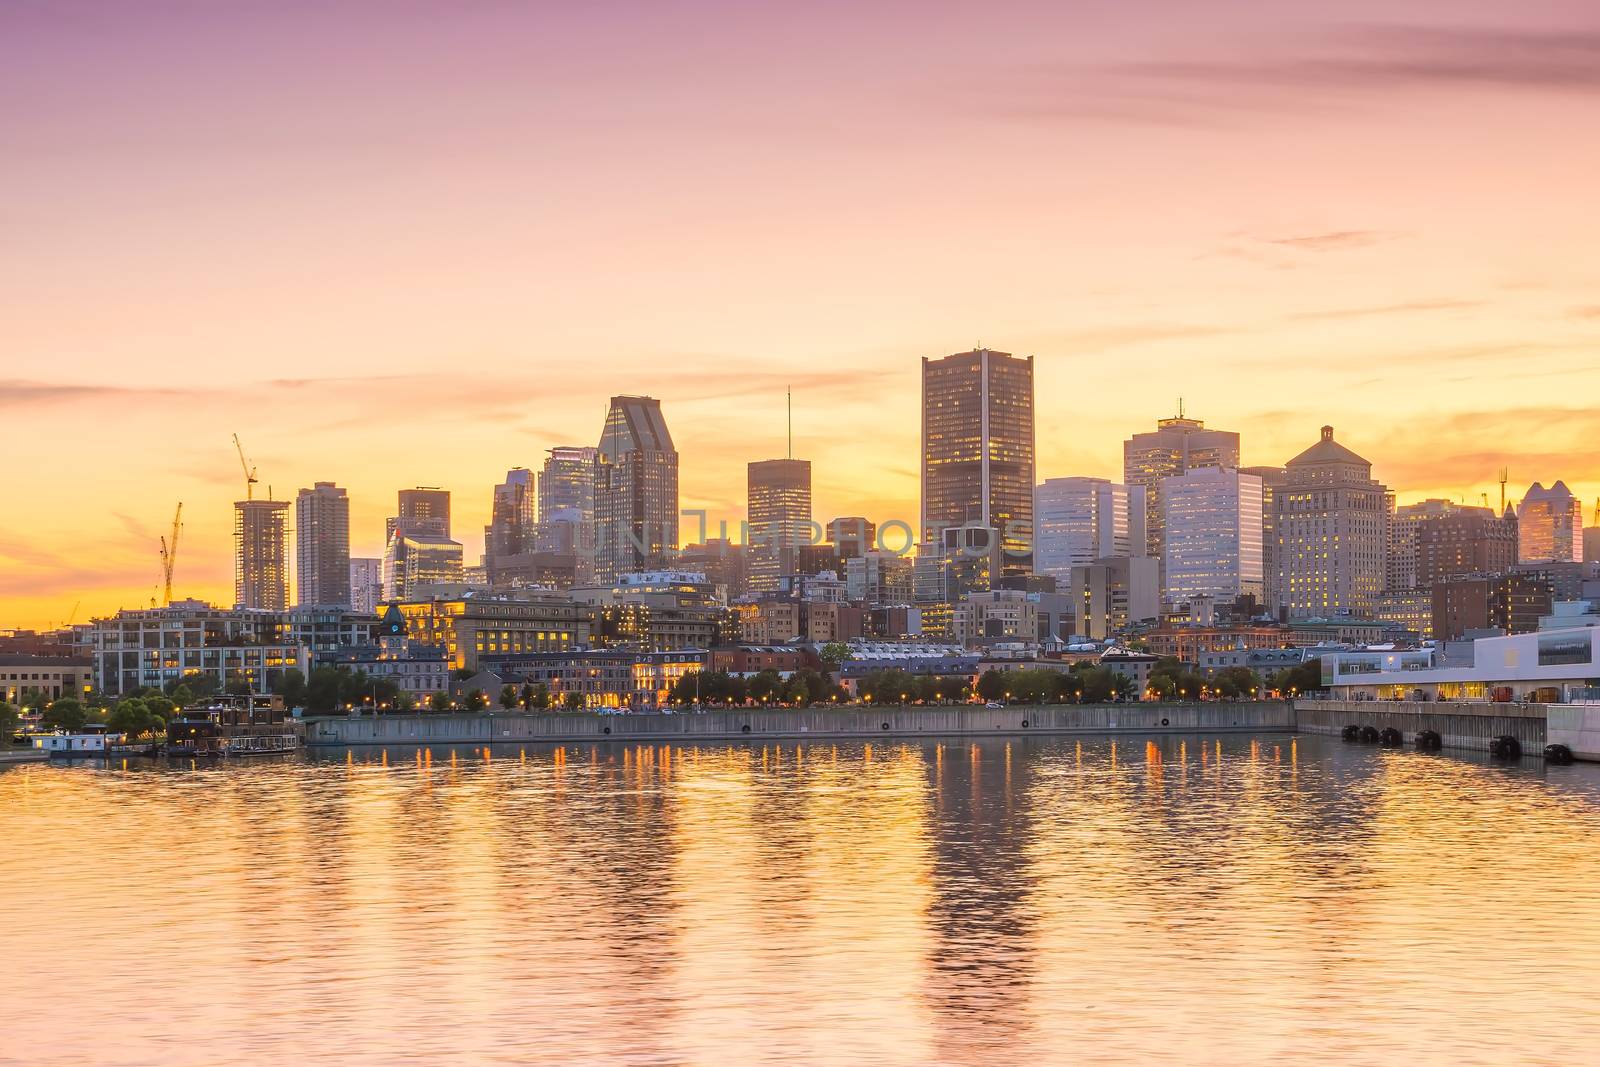 Downtown Montreal skyline at sunset by f11photo